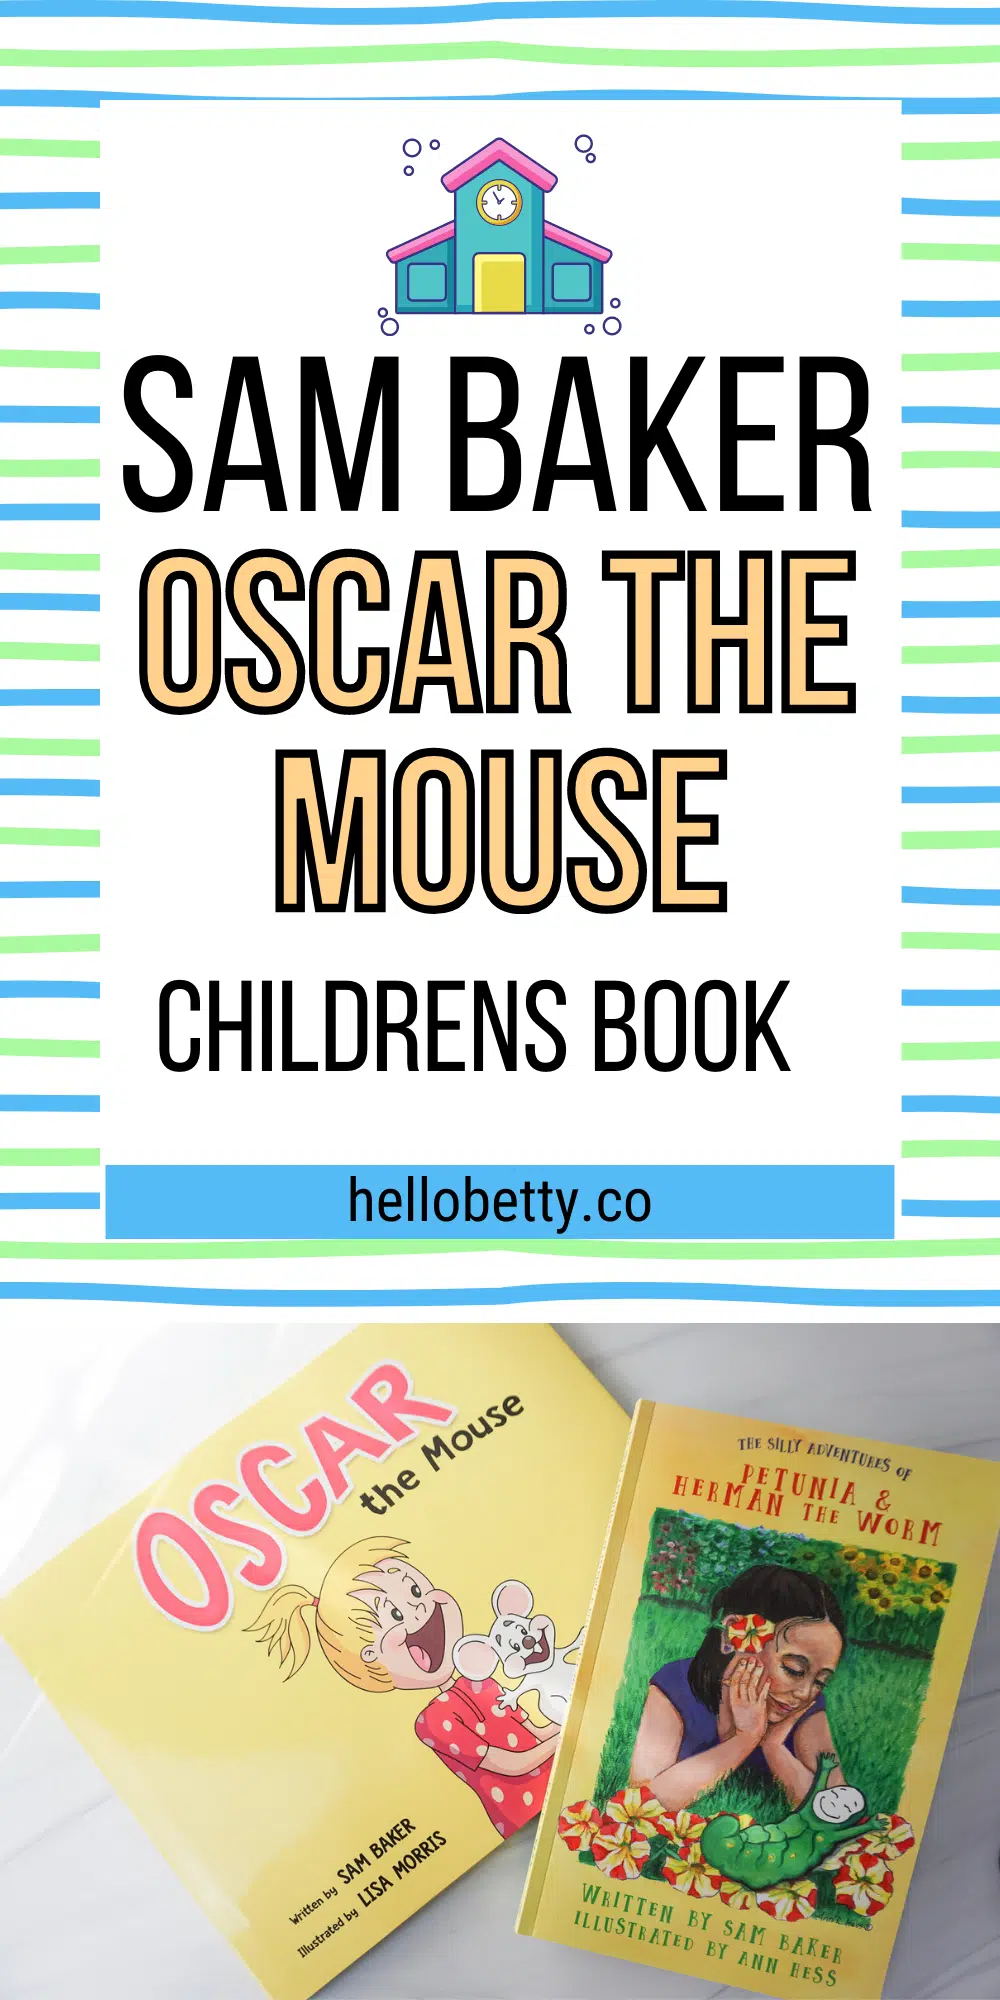 Sam Baker And His Amazing Children’s Book: Oscar the Mouse